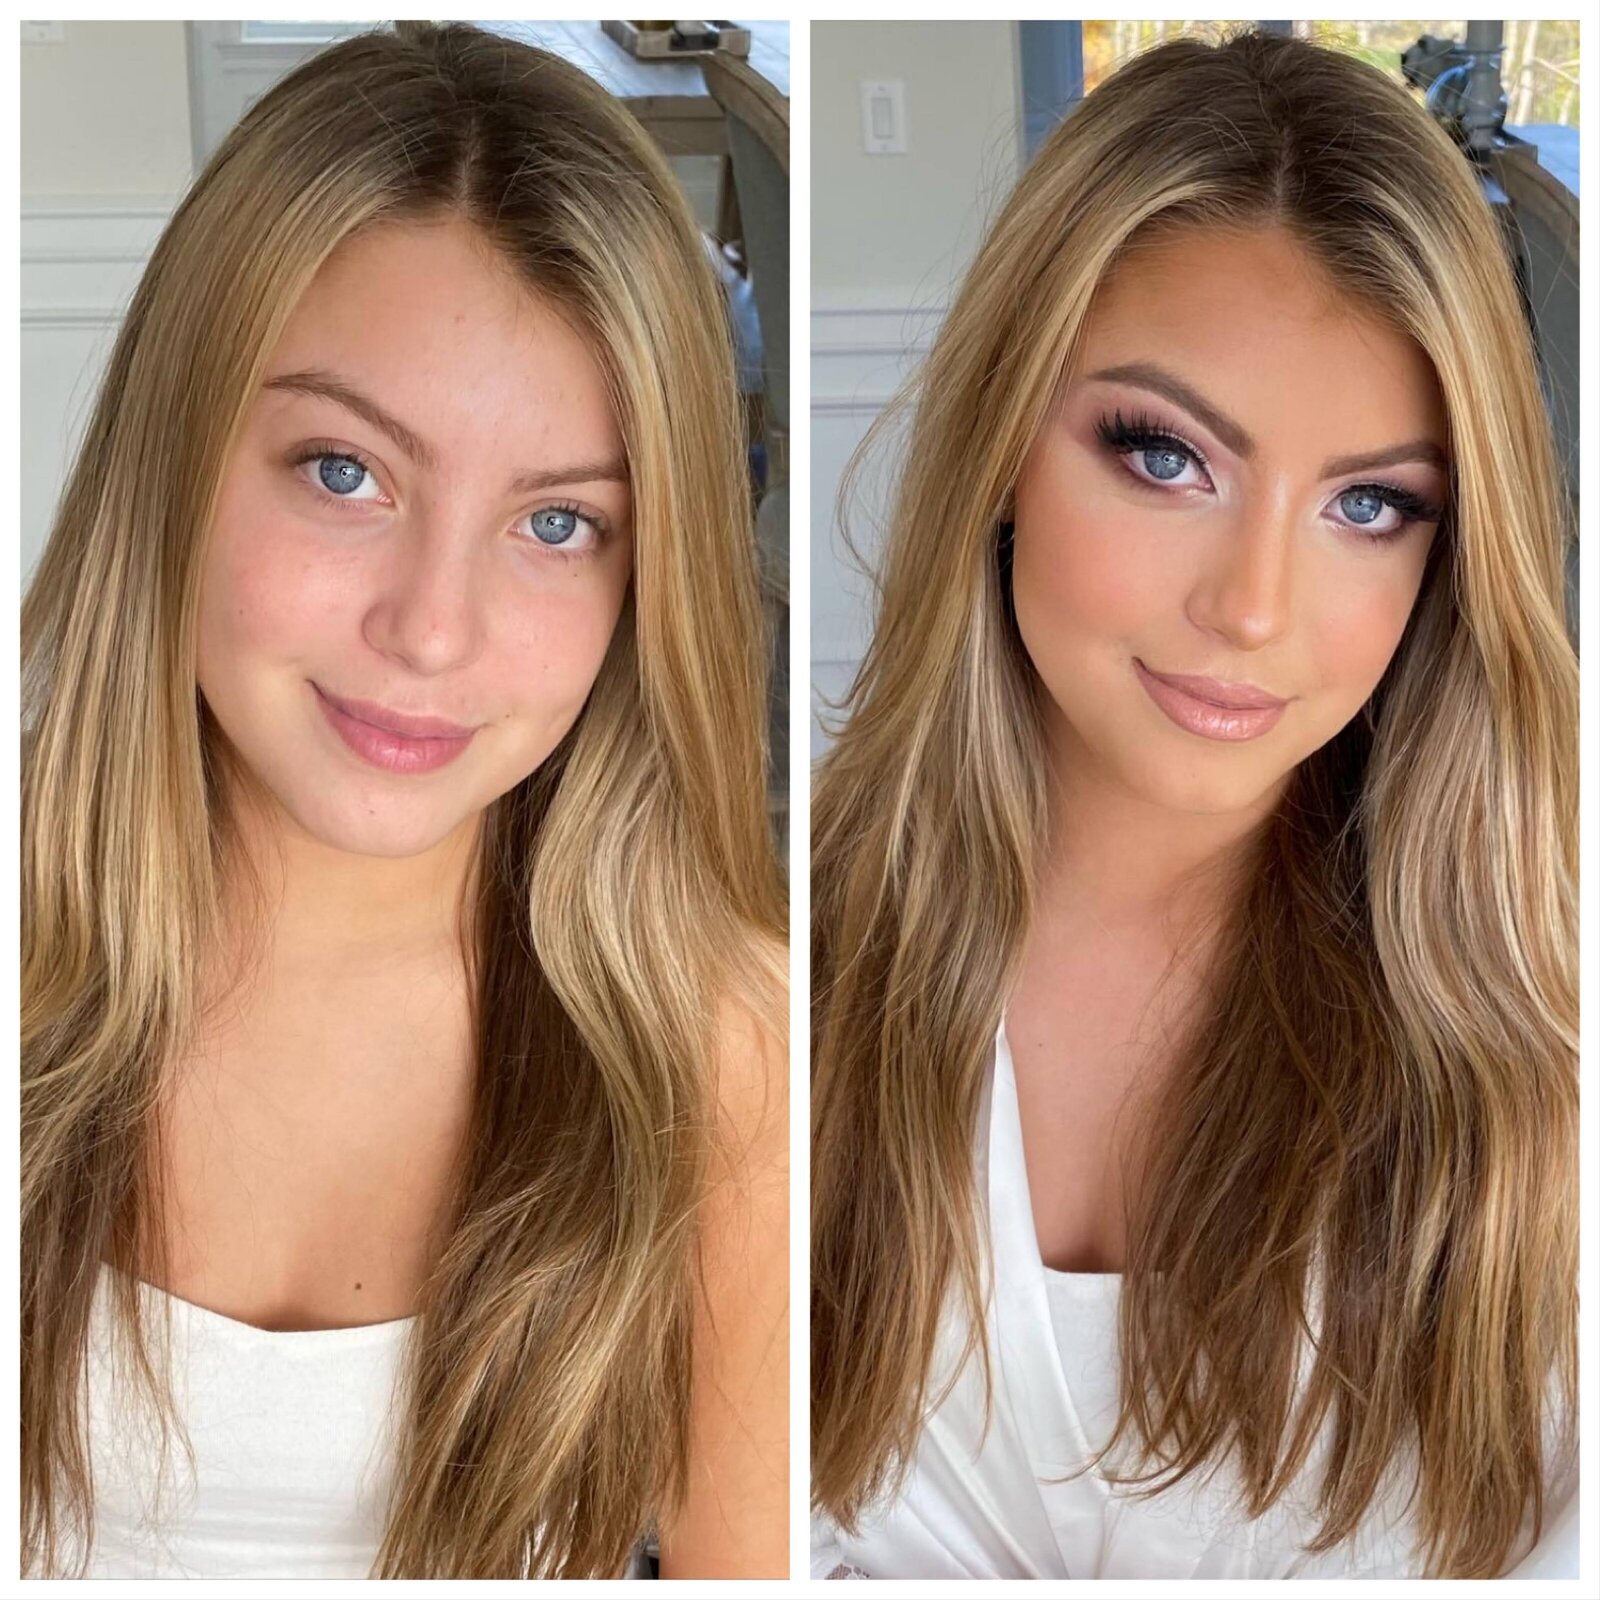 Wedding makeup before and after